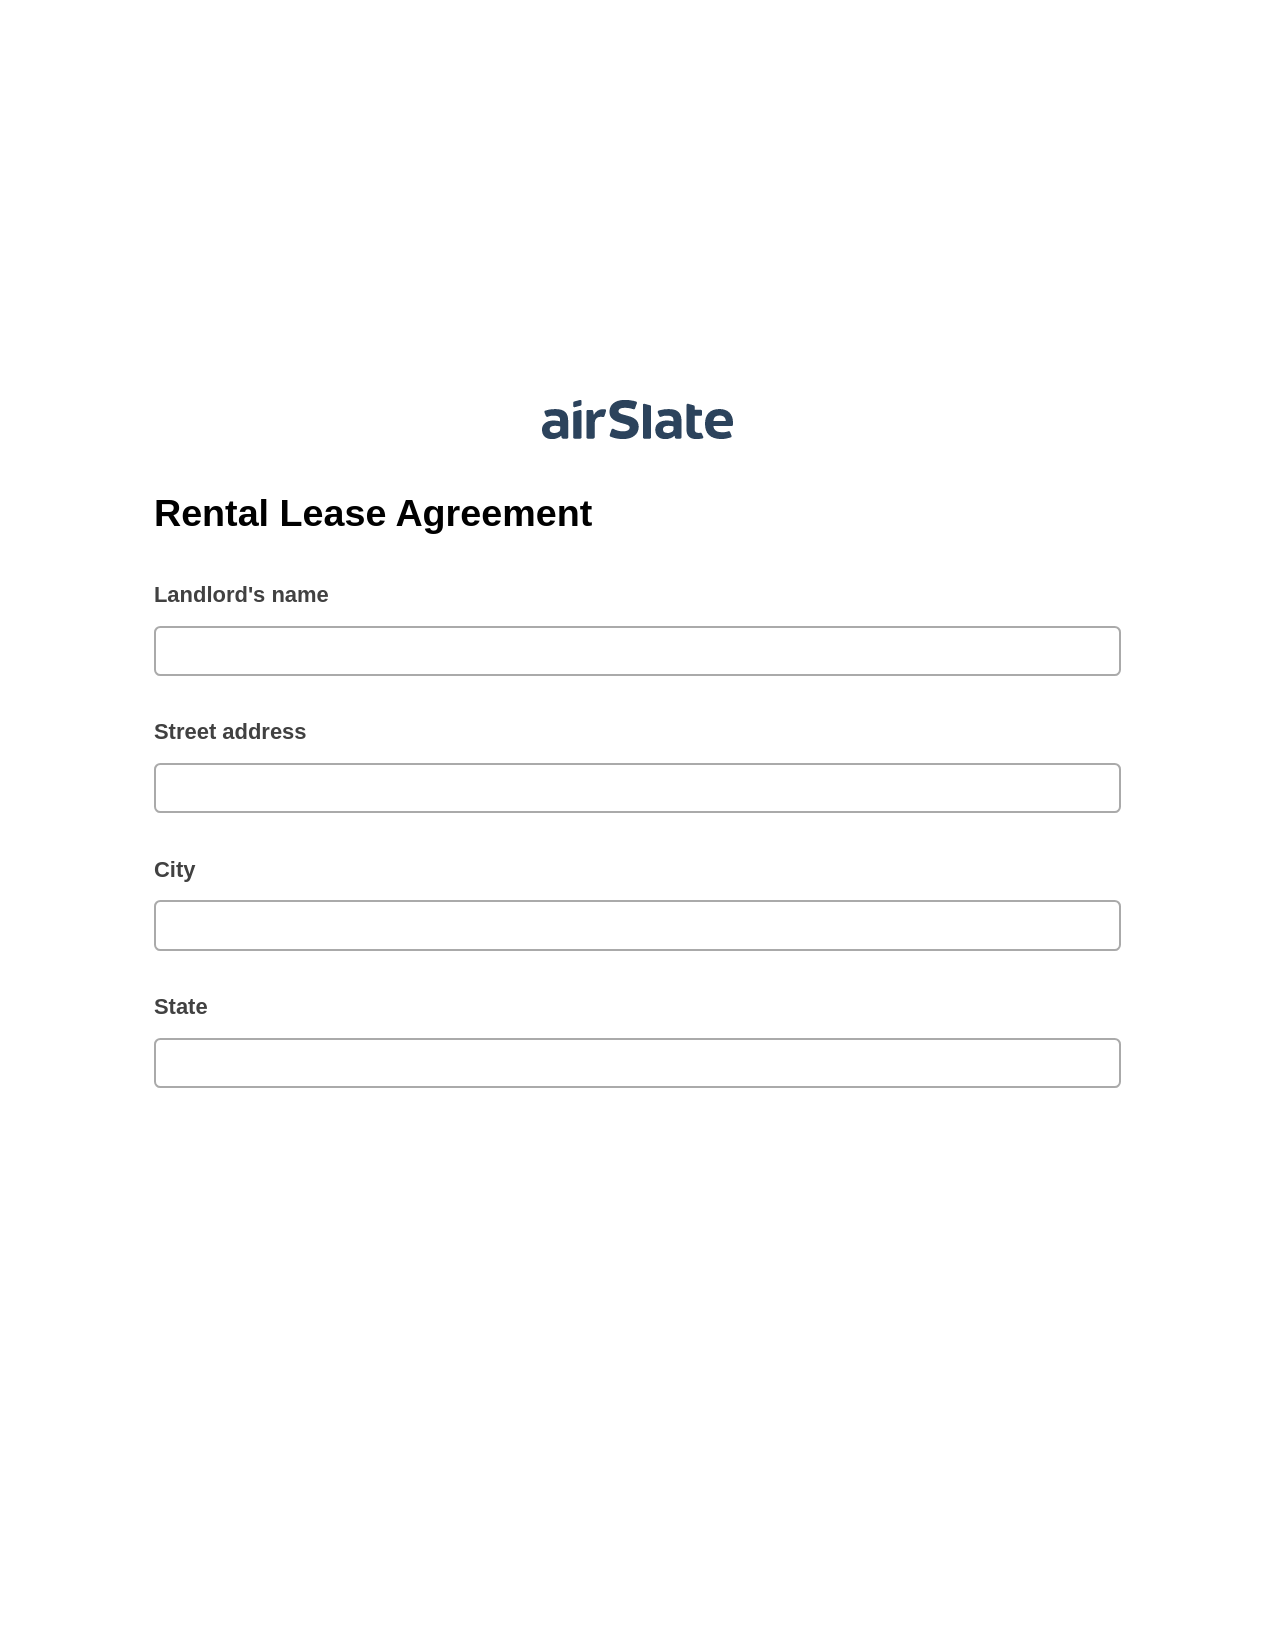 Rental Lease Agreement Pre-fill from Excel Spreadsheet Dropdown Options Bot, Add Tags to Slate Bot, Dropbox Bot